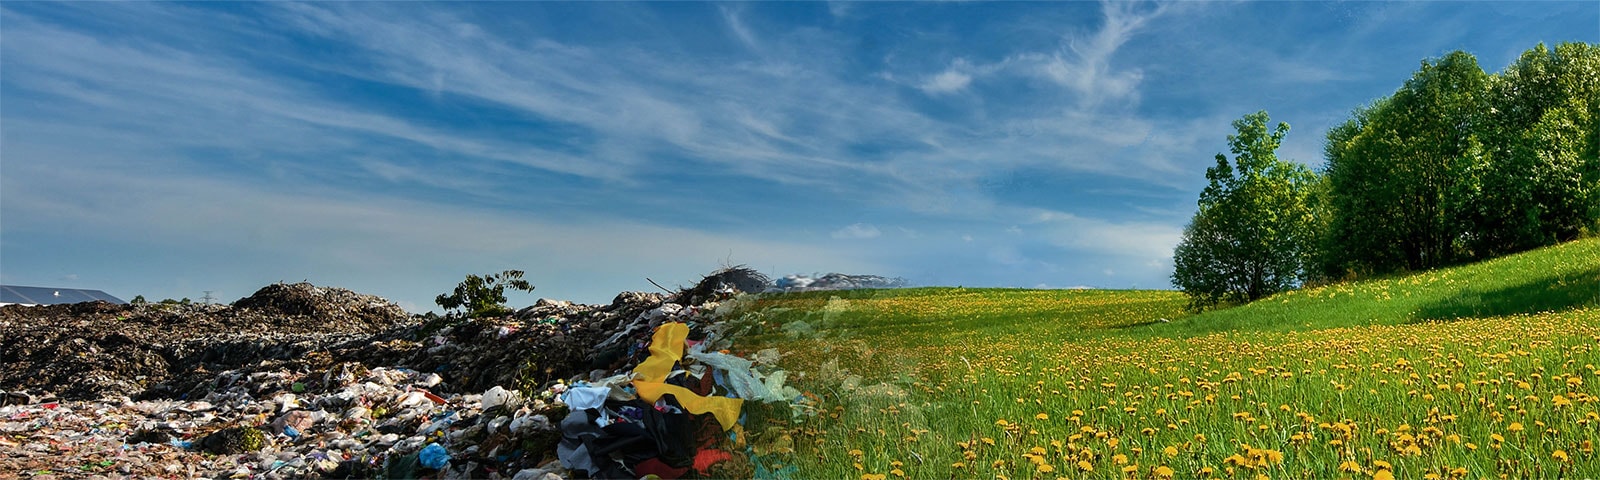 Image of two contrasting scenes : textile landfill and field with full of flowers.